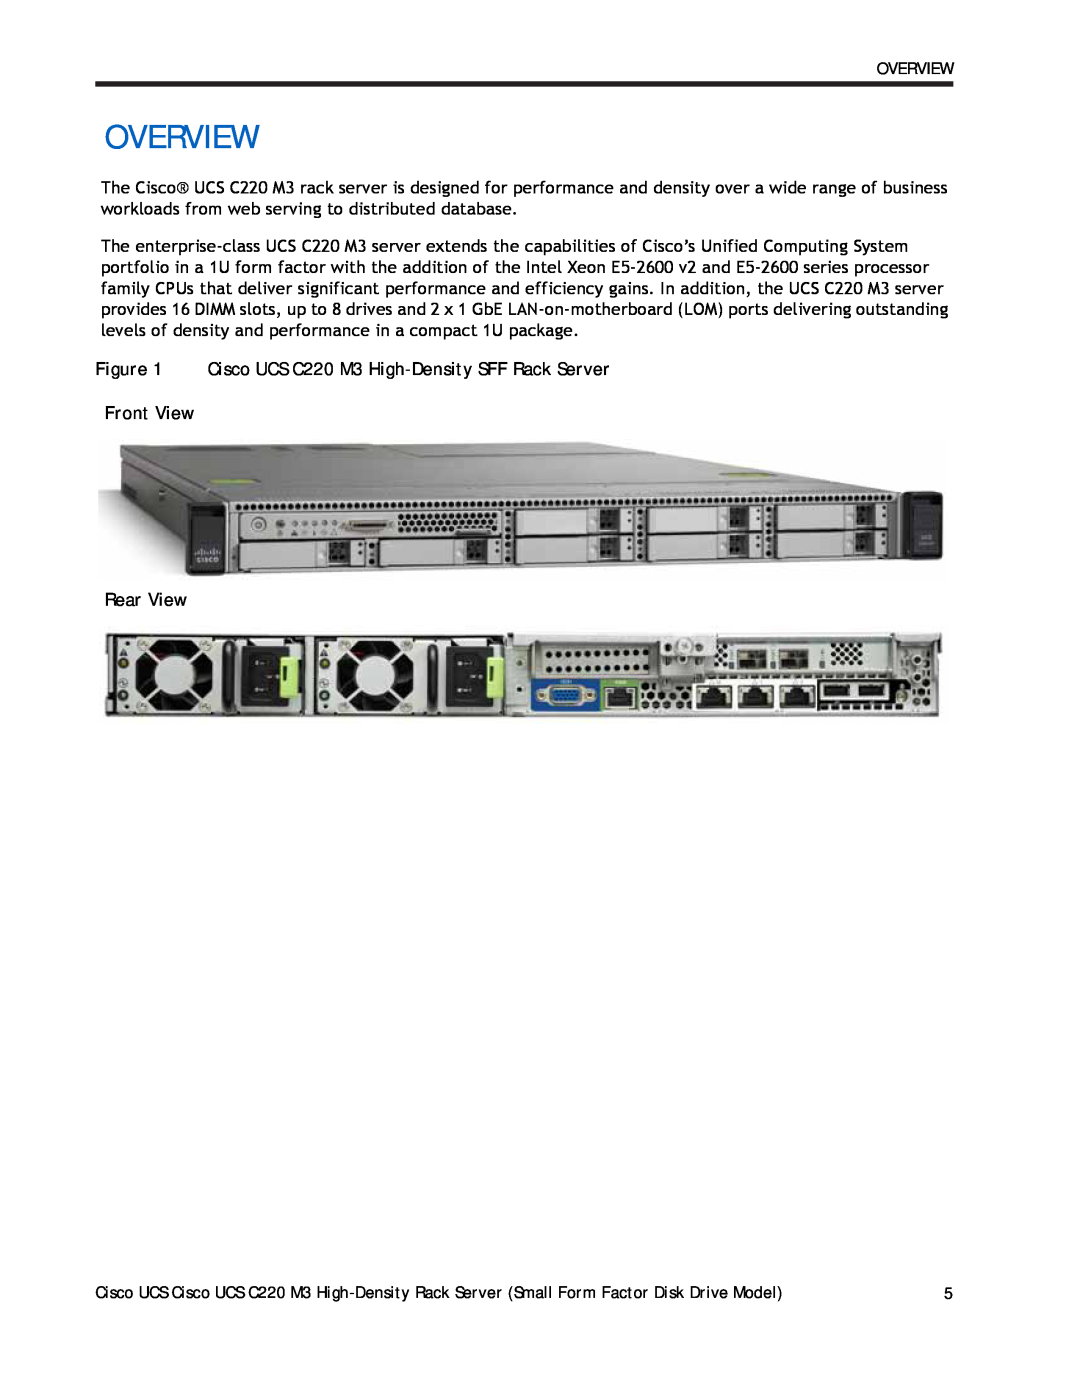 Cisco Systems A03D600GA2 manual Overview, Cisco UCS C220 M3 High-Density SFF Rack Server Front View, Rear View 